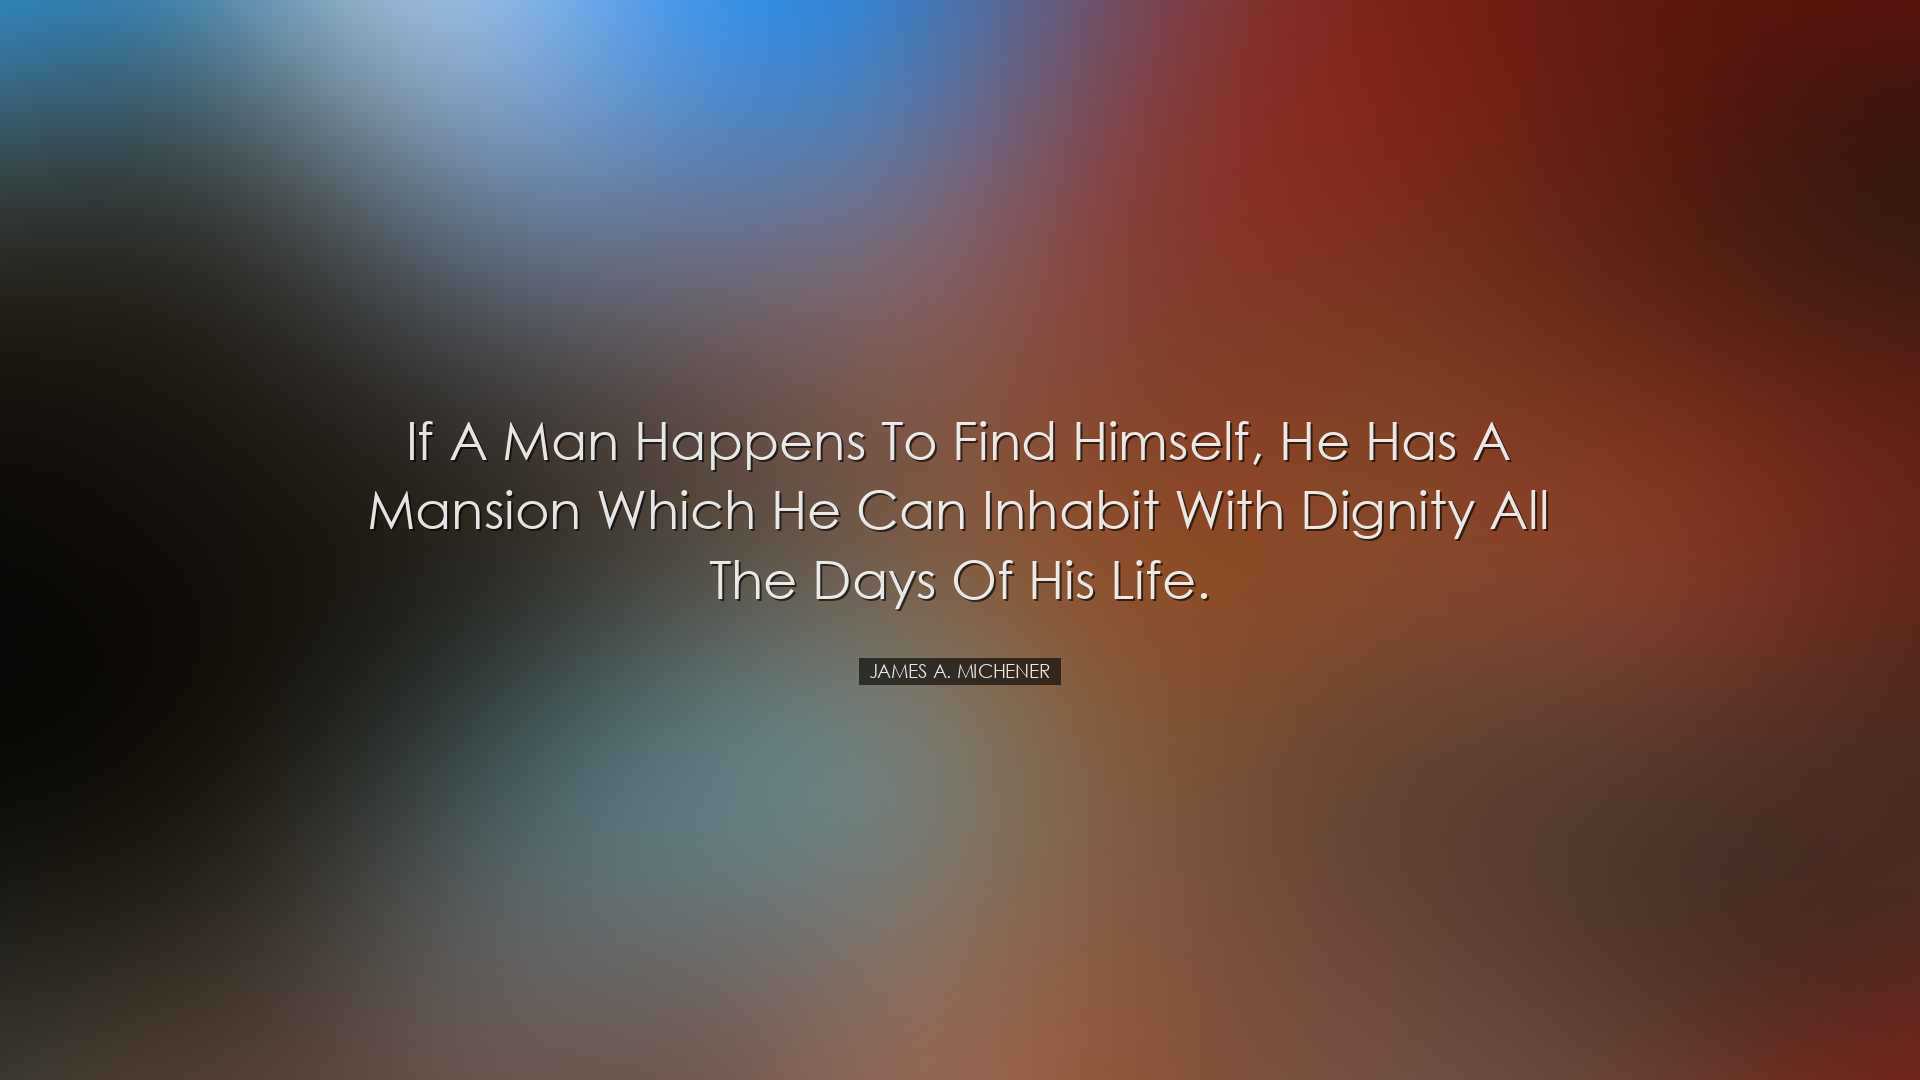 If a man happens to find himself, he has a mansion which he can in